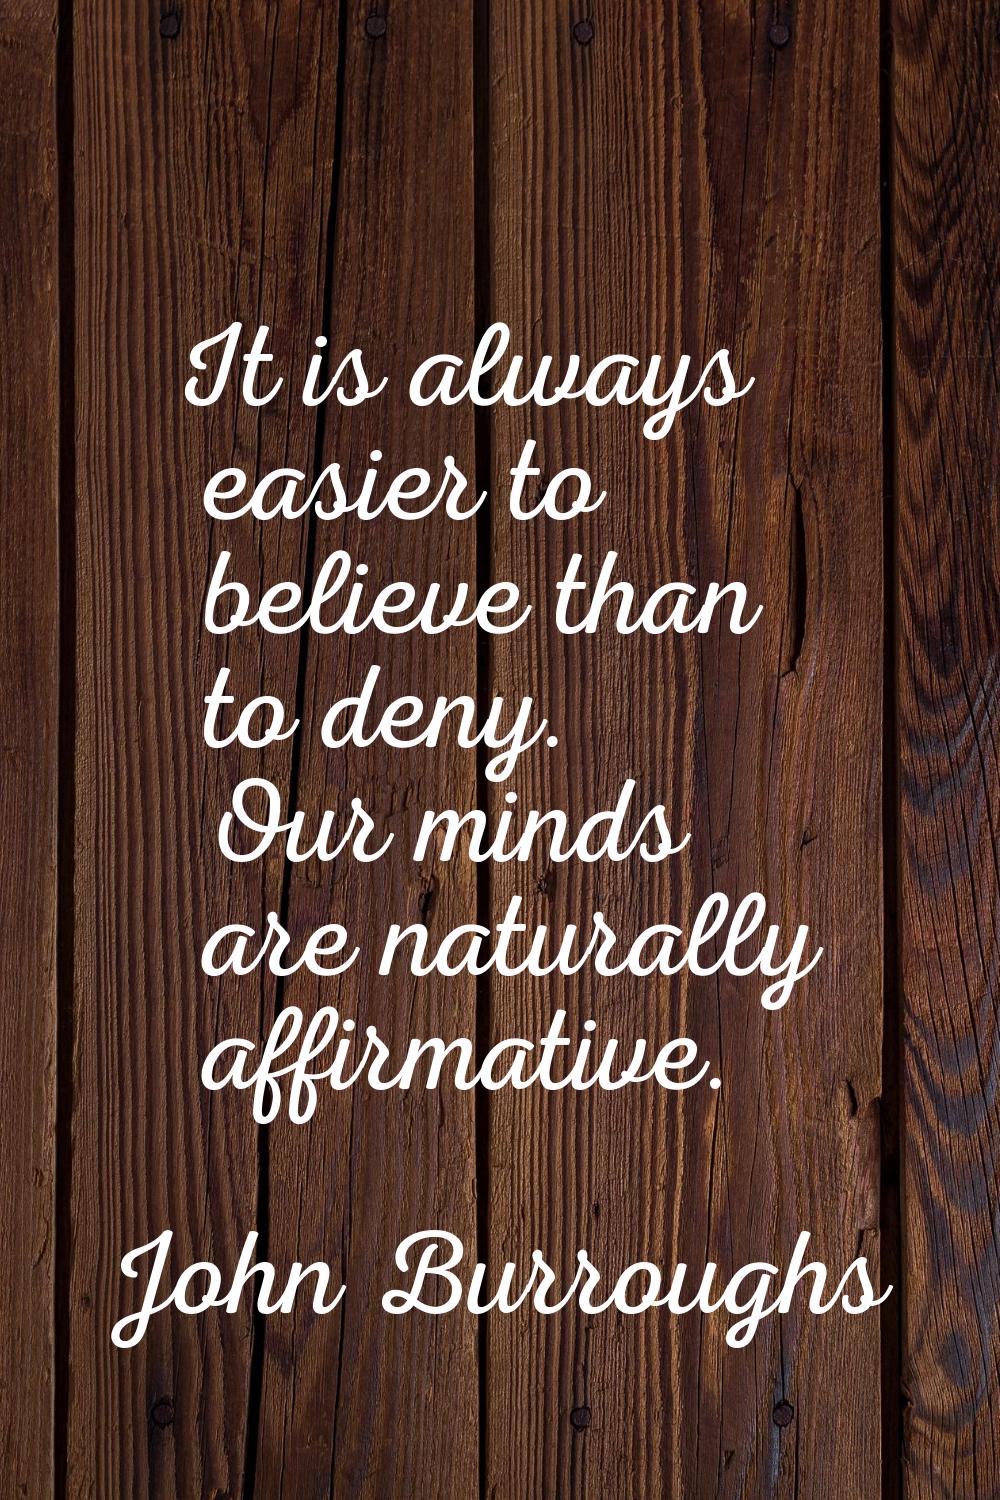 It is always easier to believe than to deny. Our minds are naturally affirmative.